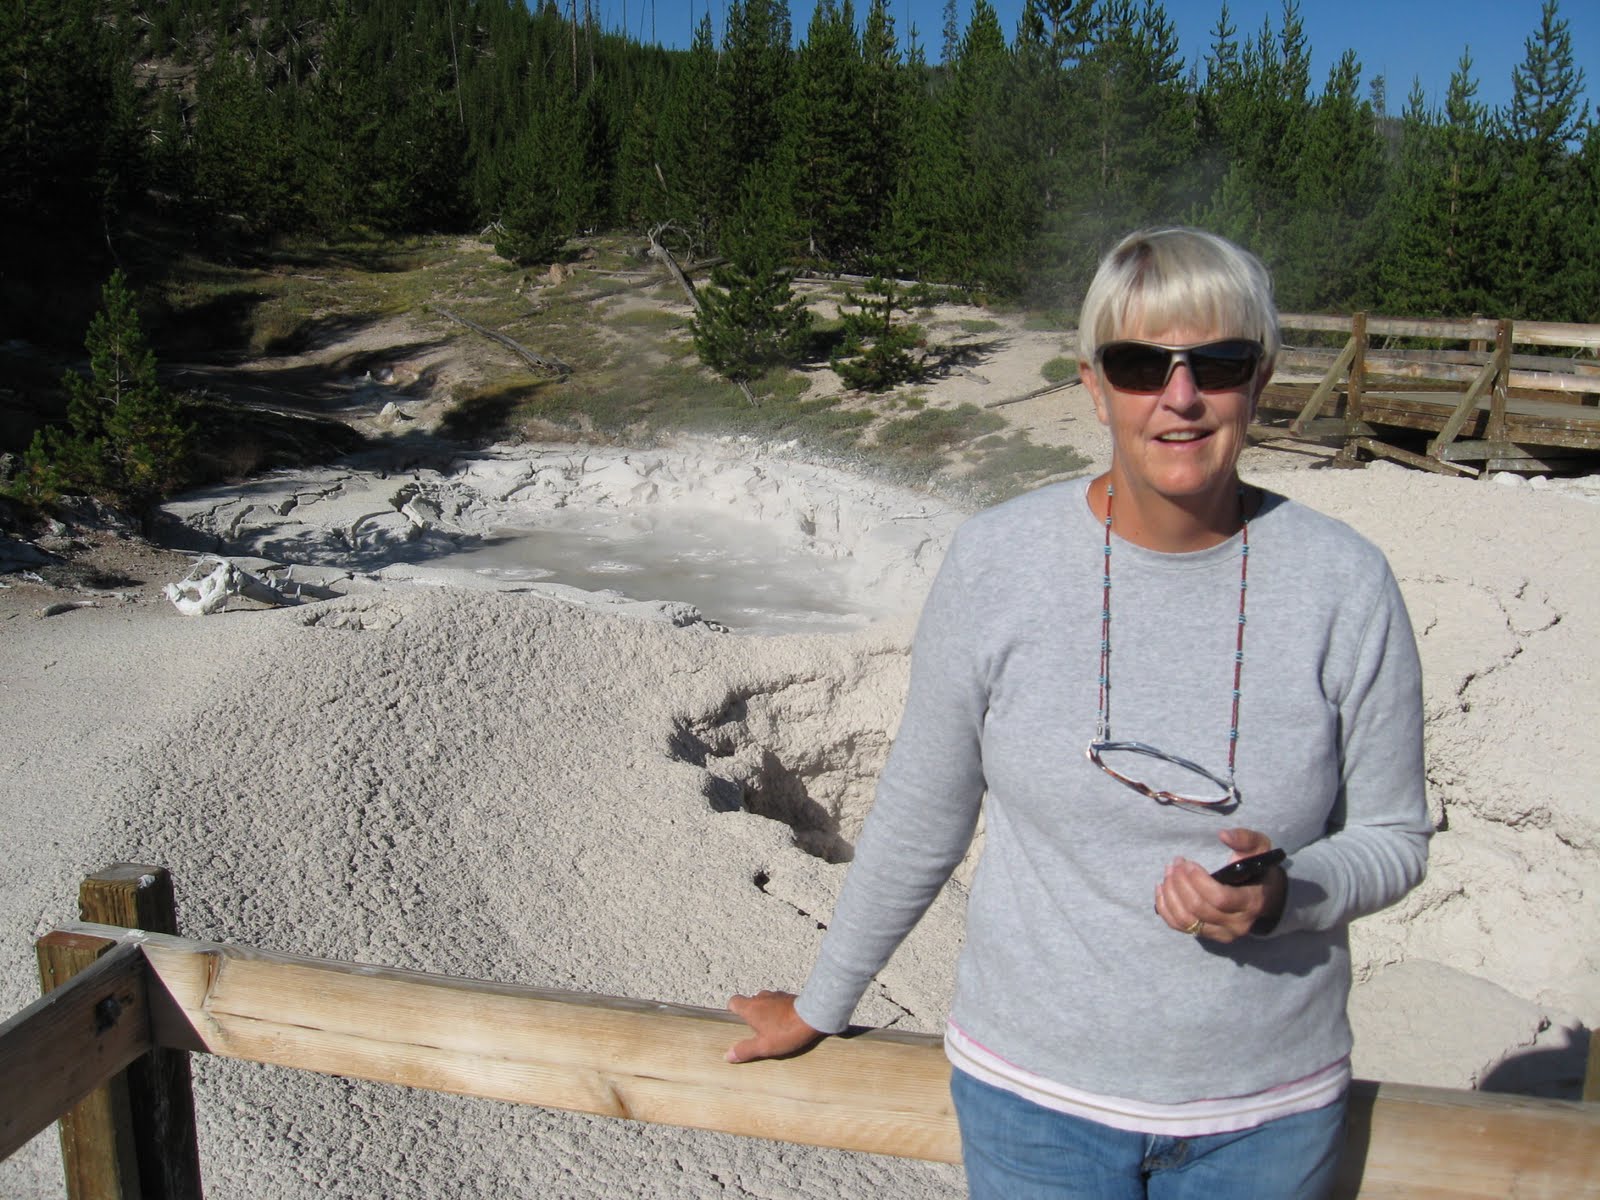 Whose Life is This?: Abby's Home & Yellowstone